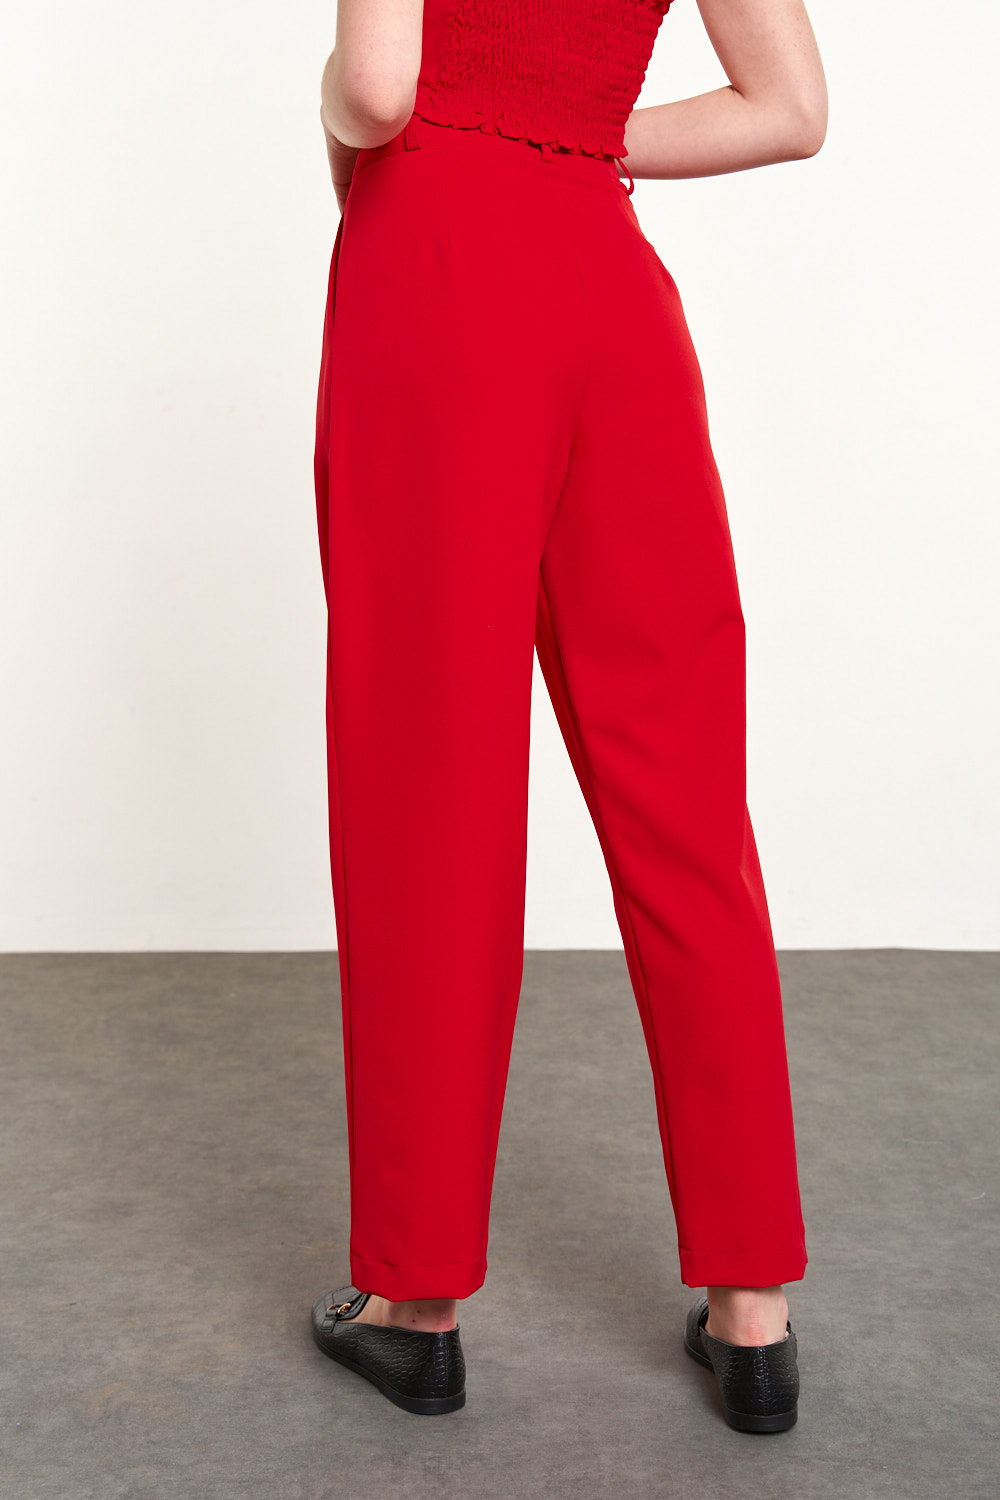 Nora Red Trousers